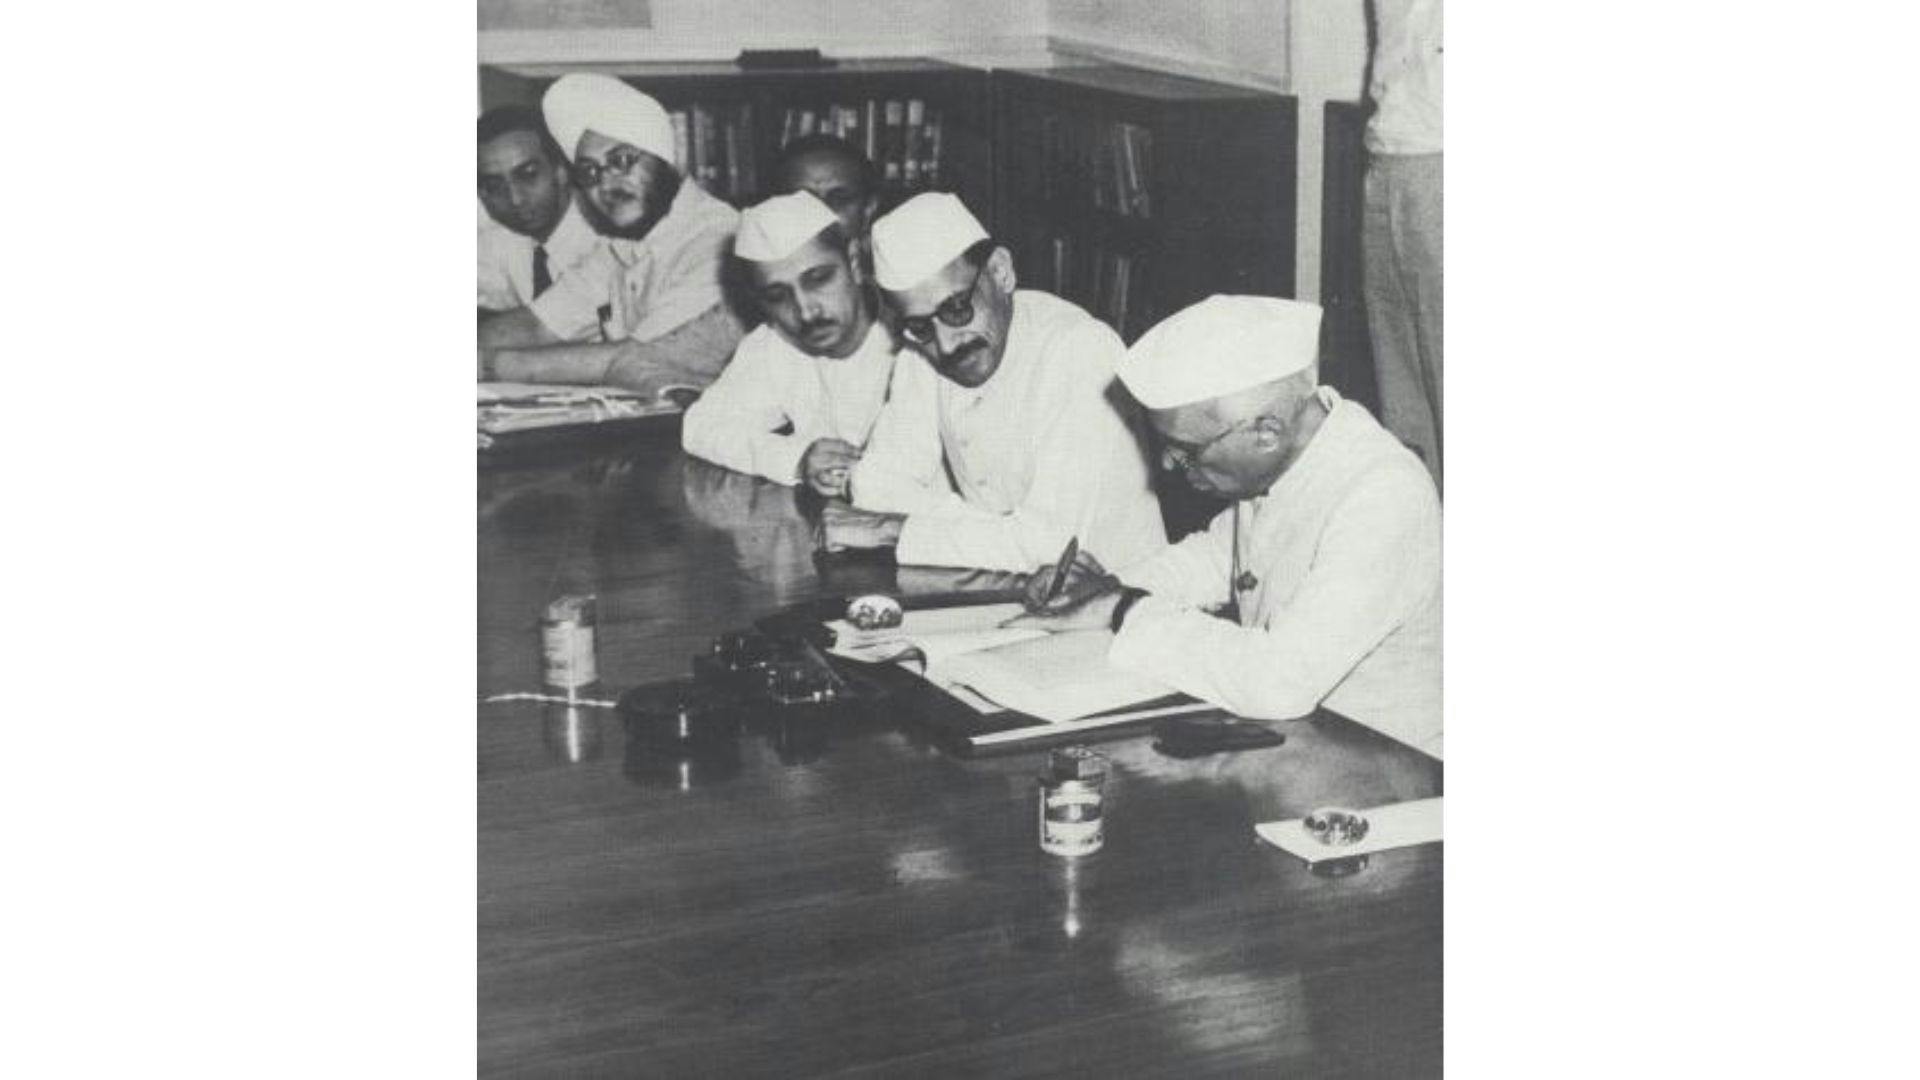 Jawaharlal Nehru signing the report of the Planning Commission on the First Five Year Plan, New Delhi, 7 July 1951 | Wikimedia Commons